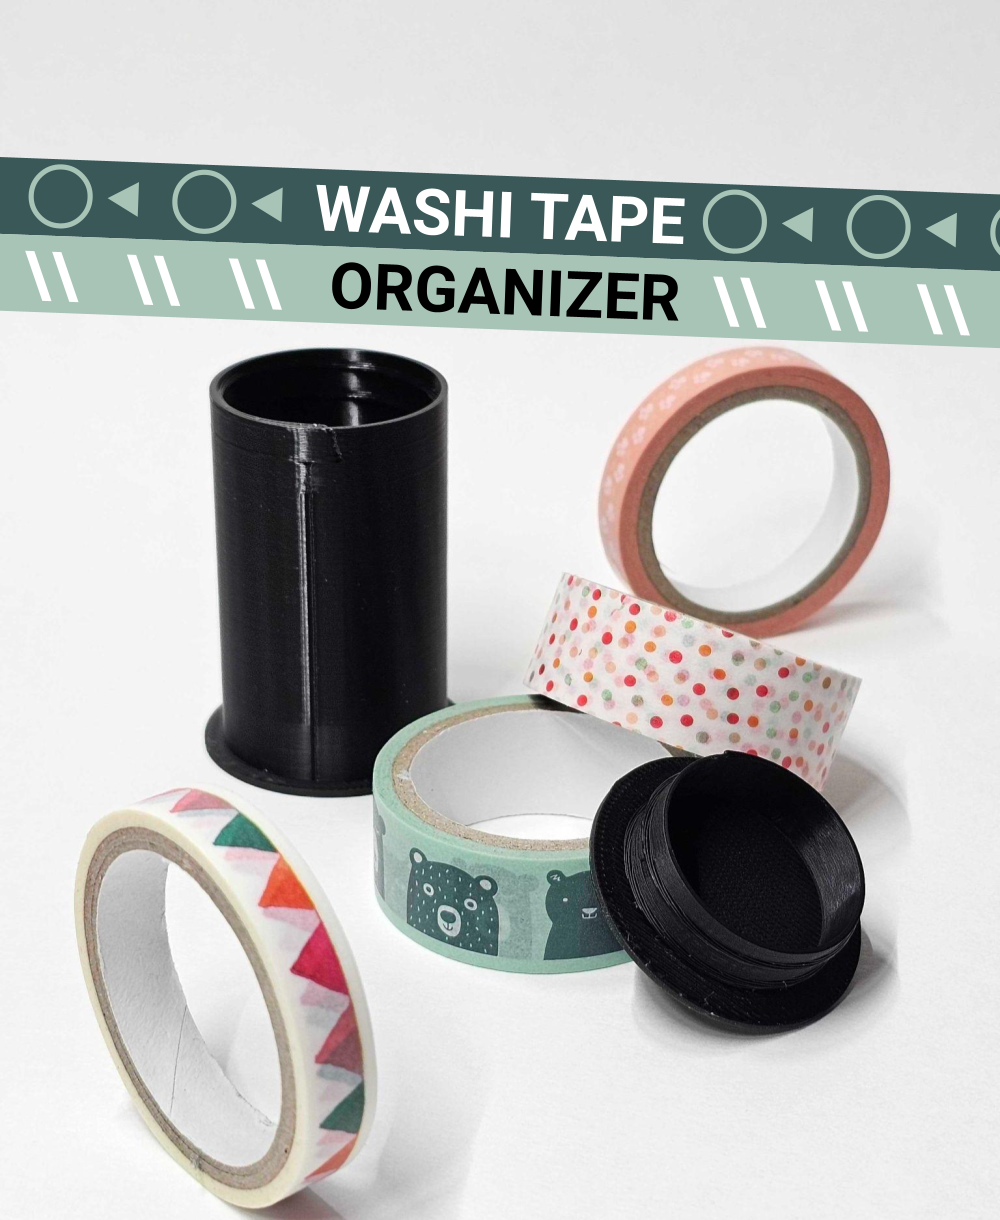 Washi tape holder, Stash supplies inside with screw-on lid!